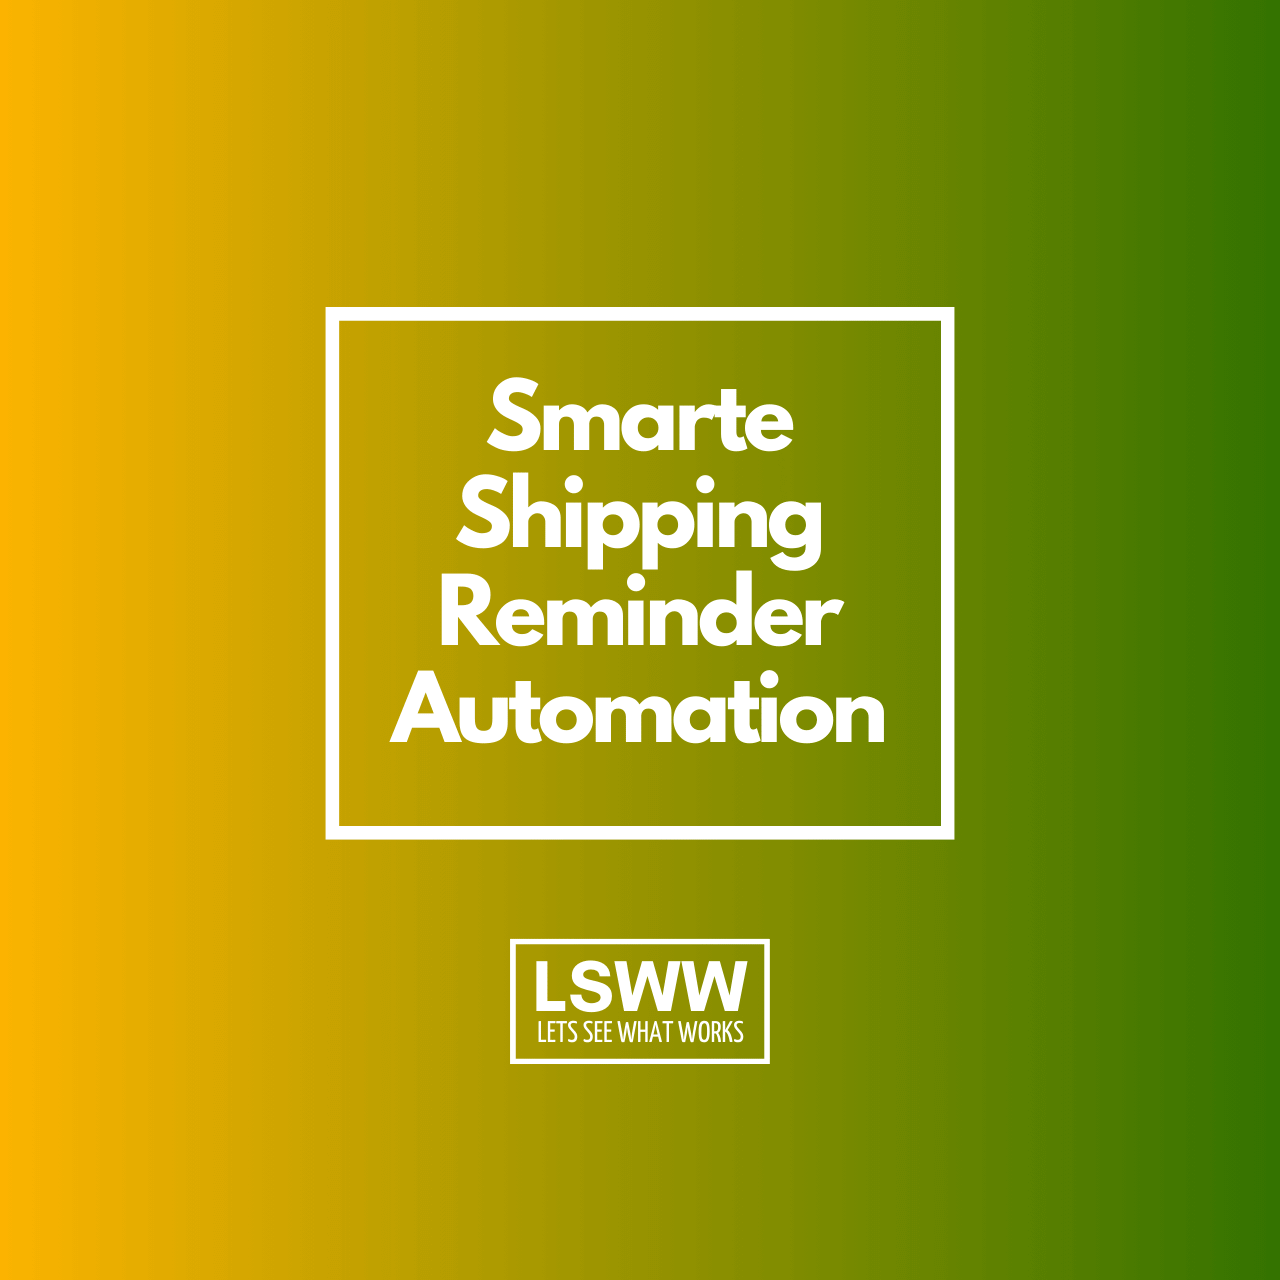 Smarte Shipping Reminder Automation
                    